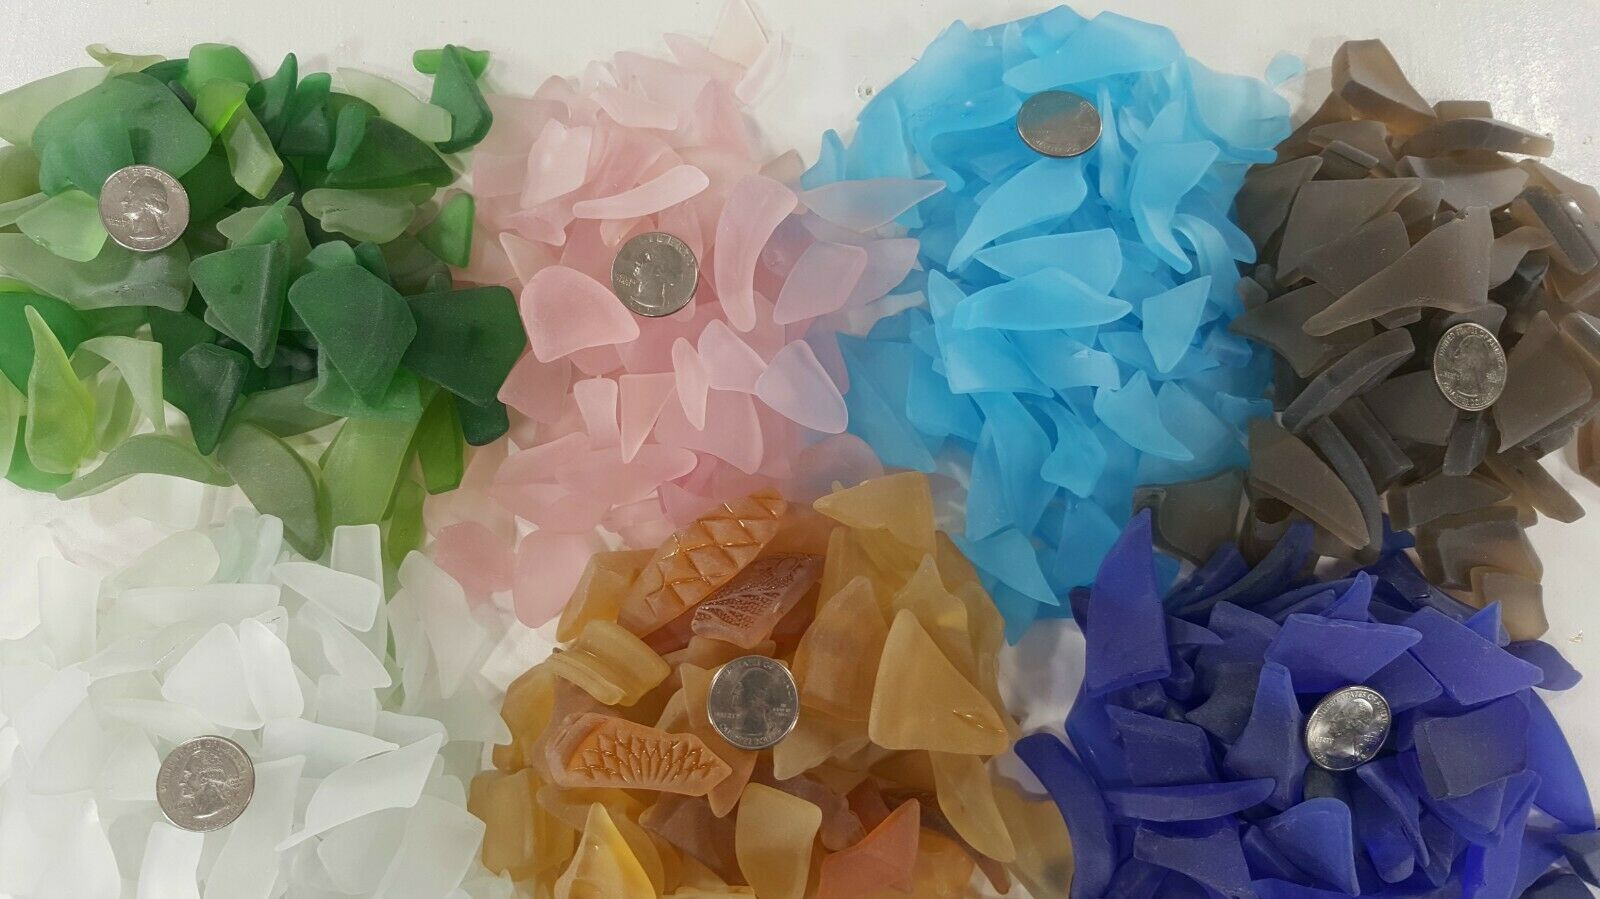 Artisanal Cultured Artist Quality Sea Glass 9 Colors! 1 lb. Bags Discounted Ship